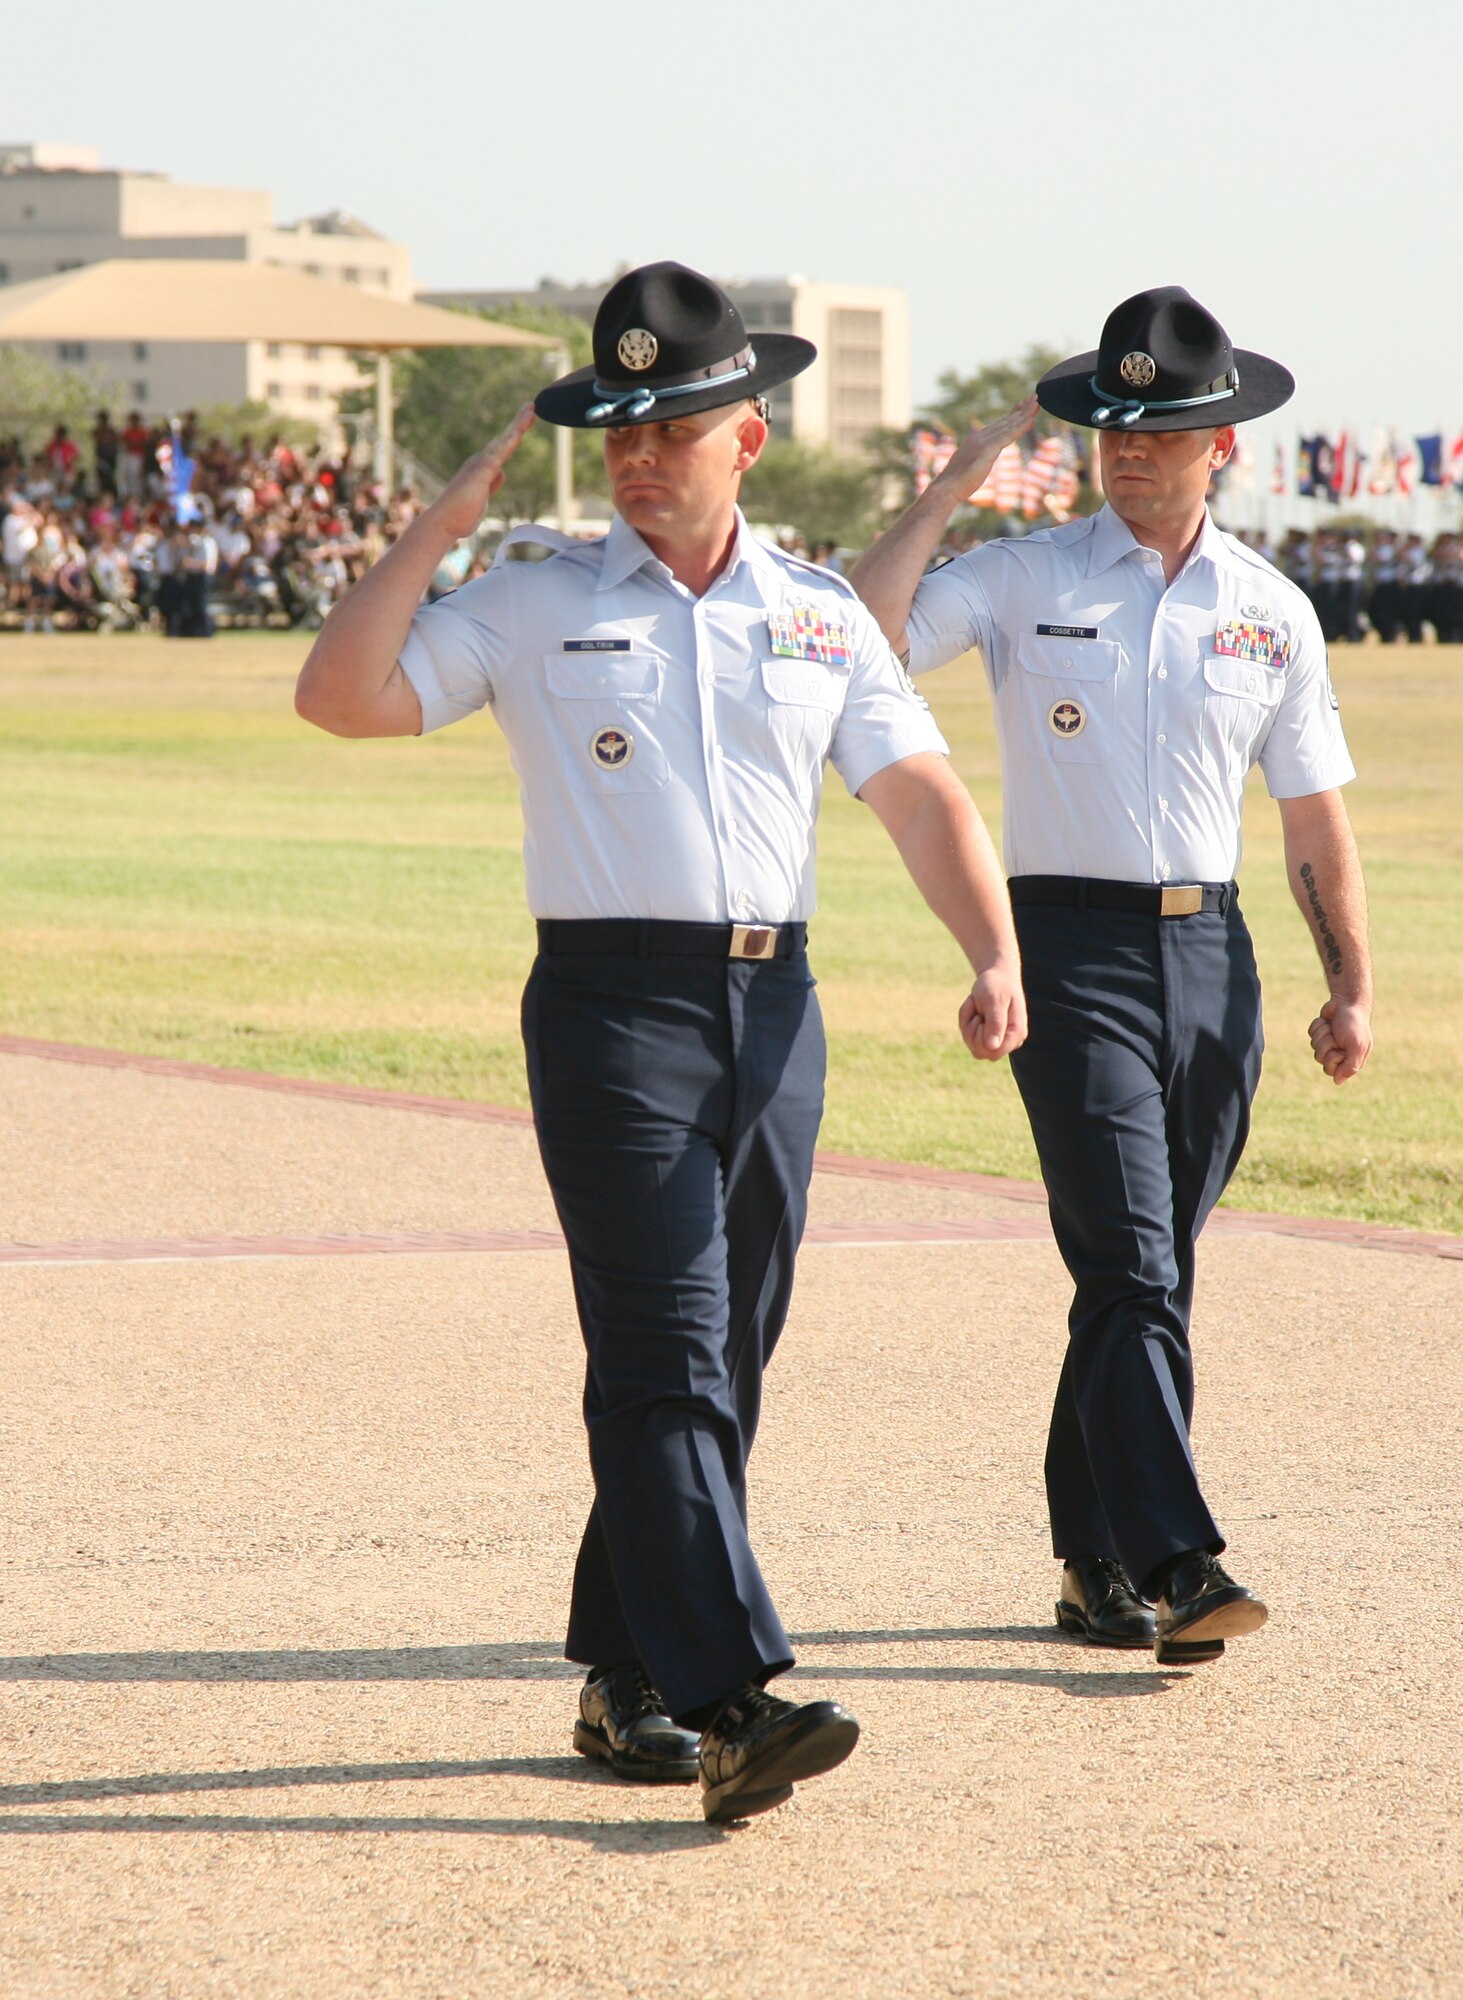 Tech Sgt. Matthew Coltrin, former Air Force Basic Military Training Instructor, (left), performs "eyes right" during his final parade as a basic military training instructor at Lackland Air Force Base, Texas, June 17, 2011. In 2006, Coltrin applied for MTI duty and throughout his years wearing his hat, he received several accolades, including the Excellence in Instruction award at Military Training Instructor School, Non-commissioned Officer of the Year, Military Training Instructor Association President’s Award, and Blue Rope of the Year.  (Courtesy Photo)